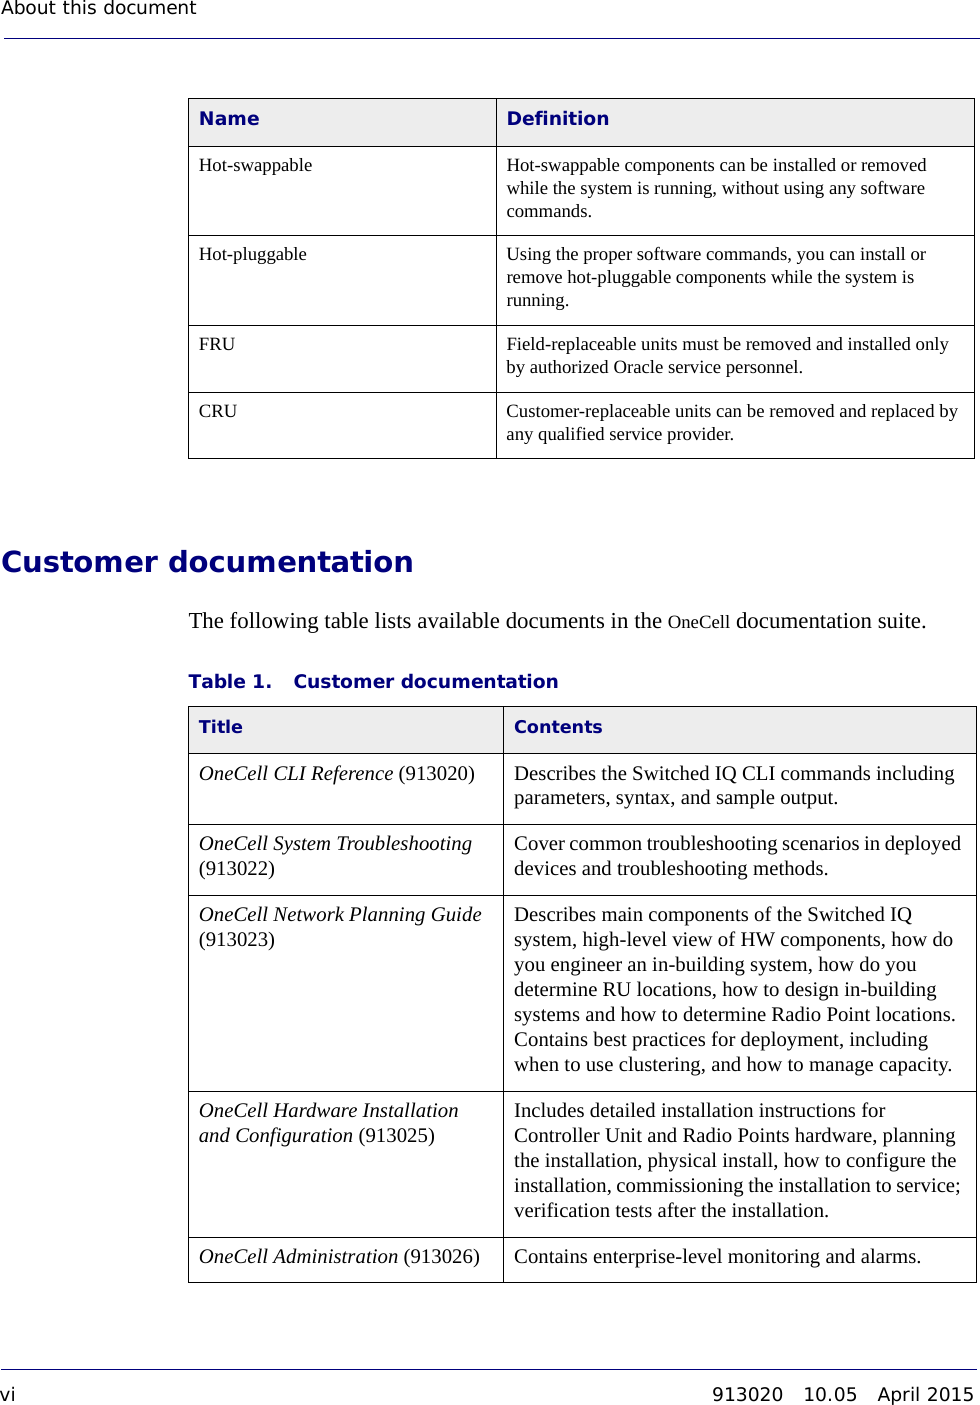 About this document vi 913020 10.05 April 2015DRAFTCustomer documentationThe following table lists available documents in the OneCell documentation suite.Name DefinitionHot-swappable Hot-swappable components can be installed or removed while the system is running, without using any software commands. Hot-pluggable Using the proper software commands, you can install or remove hot-pluggable components while the system is running.FRU Field-replaceable units must be removed and installed only by authorized Oracle service personnel.CRU Customer-replaceable units can be removed and replaced by any qualified service provider. Table 1. Customer documentationTitle ContentsOneCell CLI Reference (913020) Describes the Switched IQ CLI commands including parameters, syntax, and sample output. OneCell System Troubleshooting (913022) Cover common troubleshooting scenarios in deployed devices and troubleshooting methods. OneCell Network Planning Guide (913023) Describes main components of the Switched IQ system, high-level view of HW components, how do you engineer an in-building system, how do you determine RU locations, how to design in-building systems and how to determine Radio Point locations. Contains best practices for deployment, including when to use clustering, and how to manage capacity. OneCell Hardware Installation and Configuration (913025) Includes detailed installation instructions for Controller Unit and Radio Points hardware, planning the installation, physical install, how to configure the installation, commissioning the installation to service; verification tests after the installation.OneCell Administration (913026) Contains enterprise-level monitoring and alarms. 